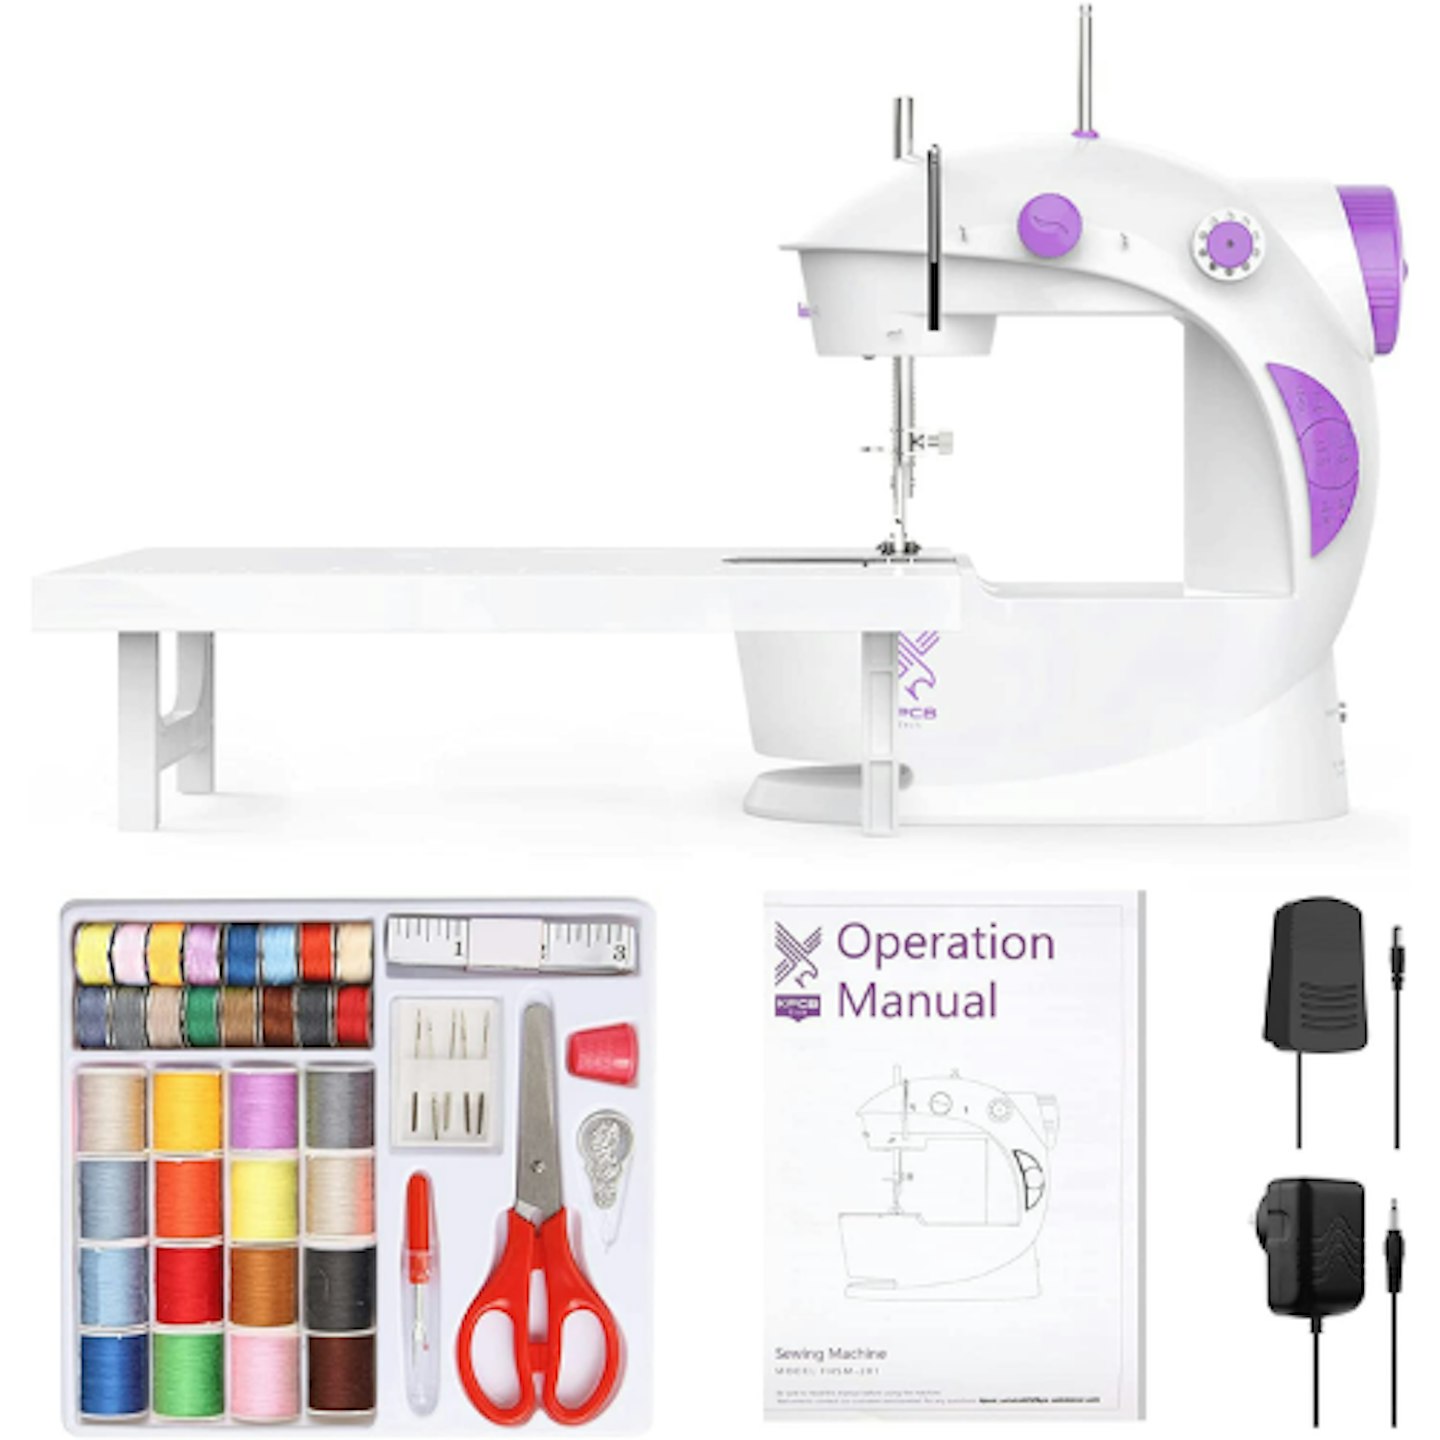 KPCB Tech Mini Sewing Machine with Extension Table